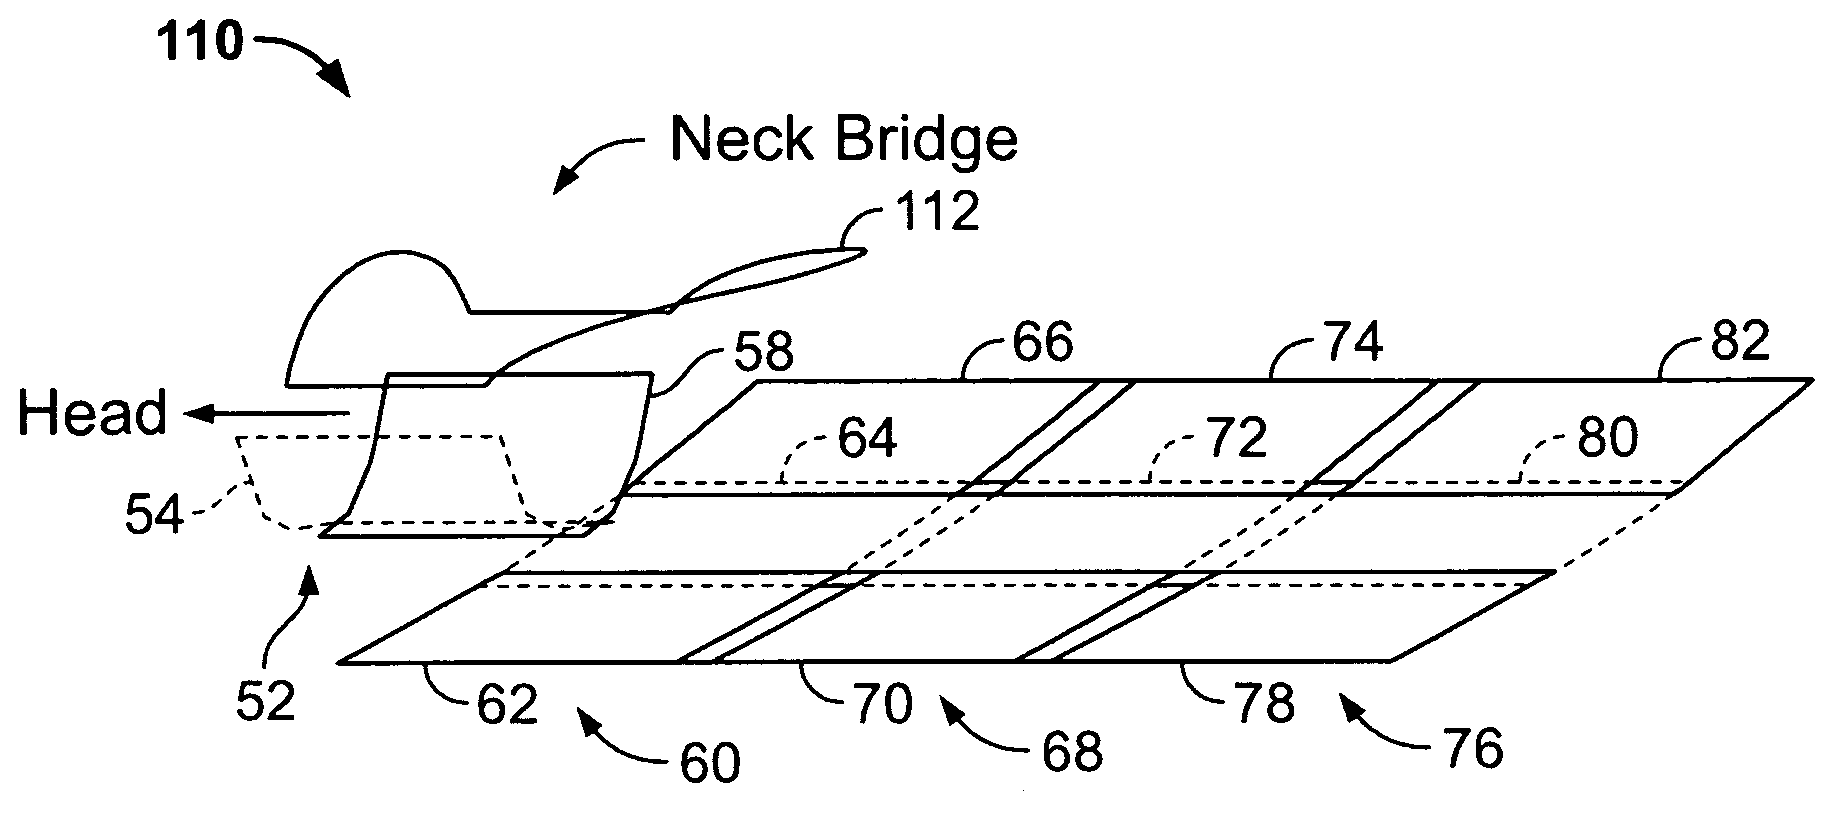 Cervical-thoracic-lumbar spine phased array coil for Magnetic Resonance Imaging